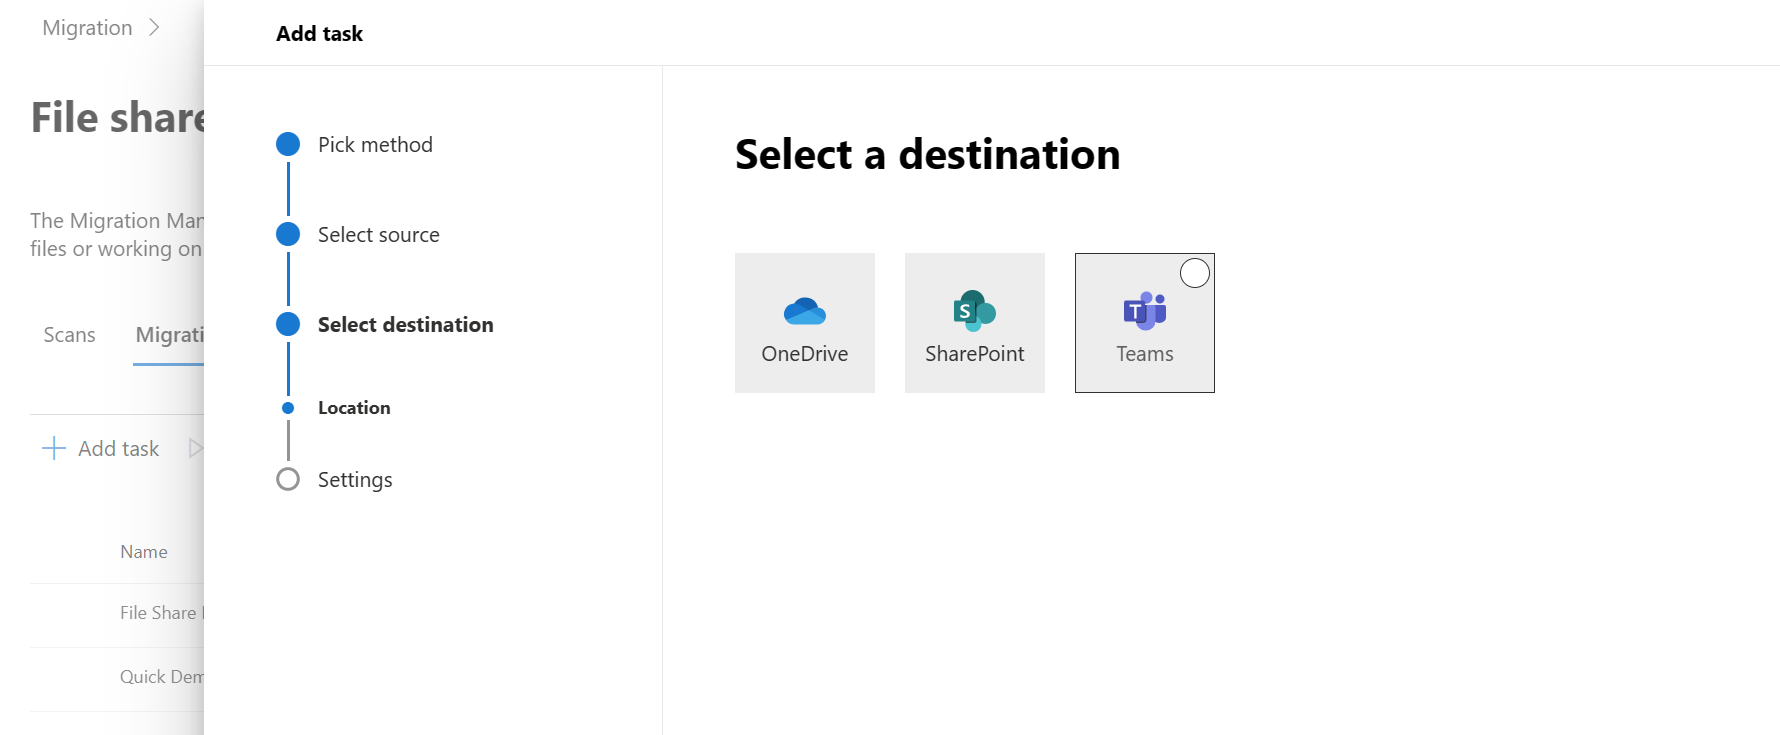 The Select a destination screen displays the options OneDrive, SharePoint, and Teams. Pick where you want to migrate the source files to in Microsoft 365.